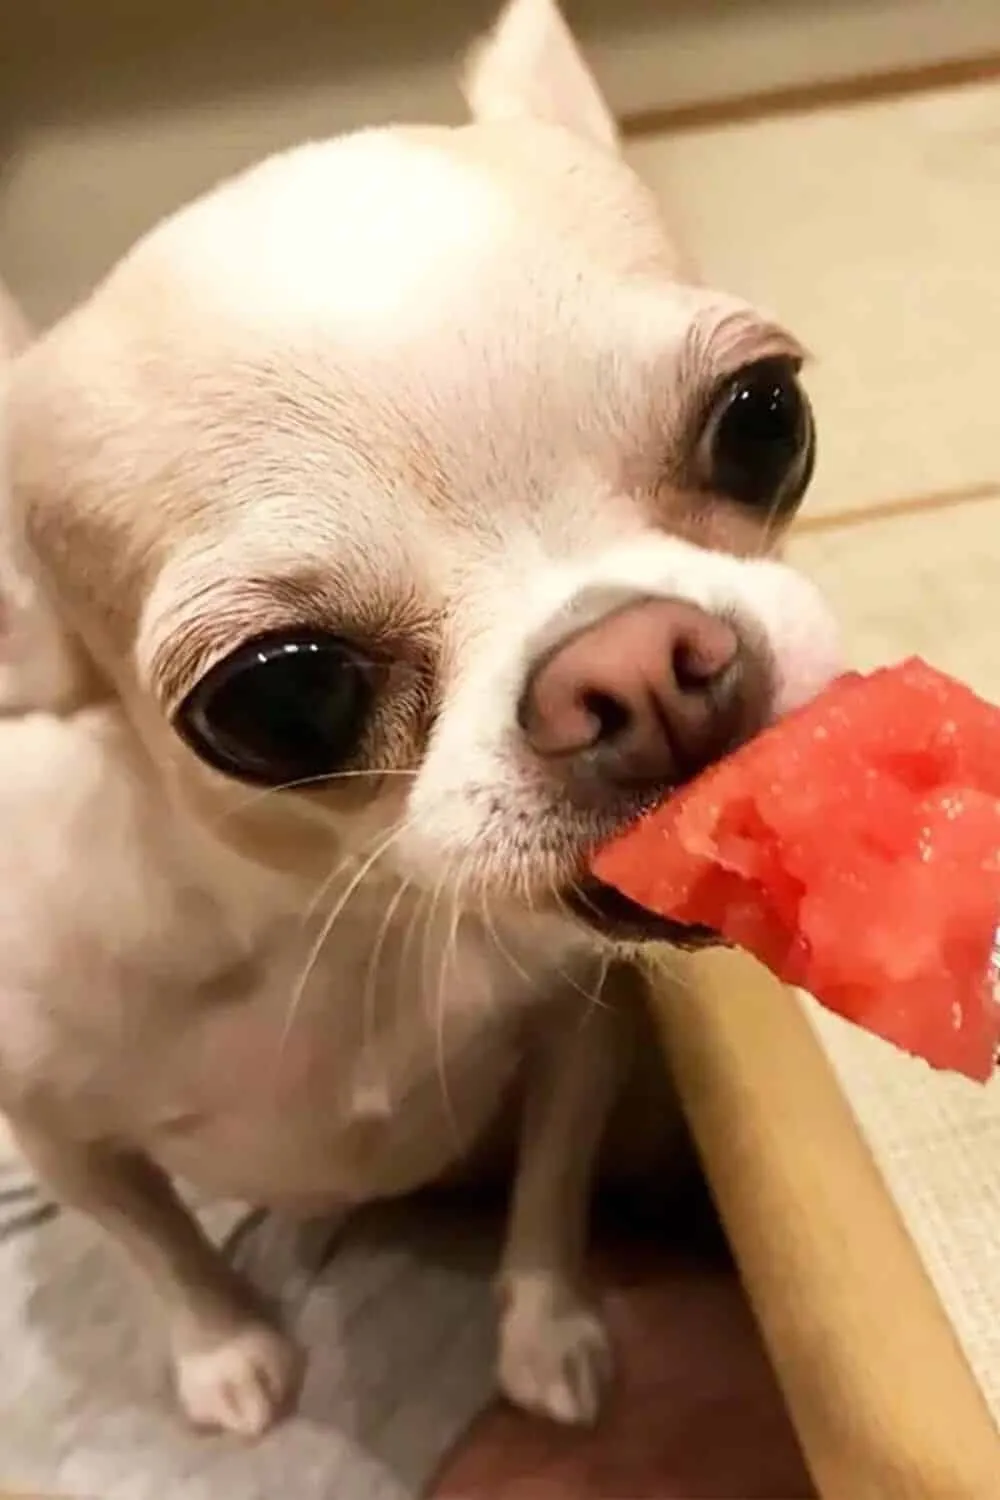 You Can’t Trust Chihuahuas to Be Gentle
